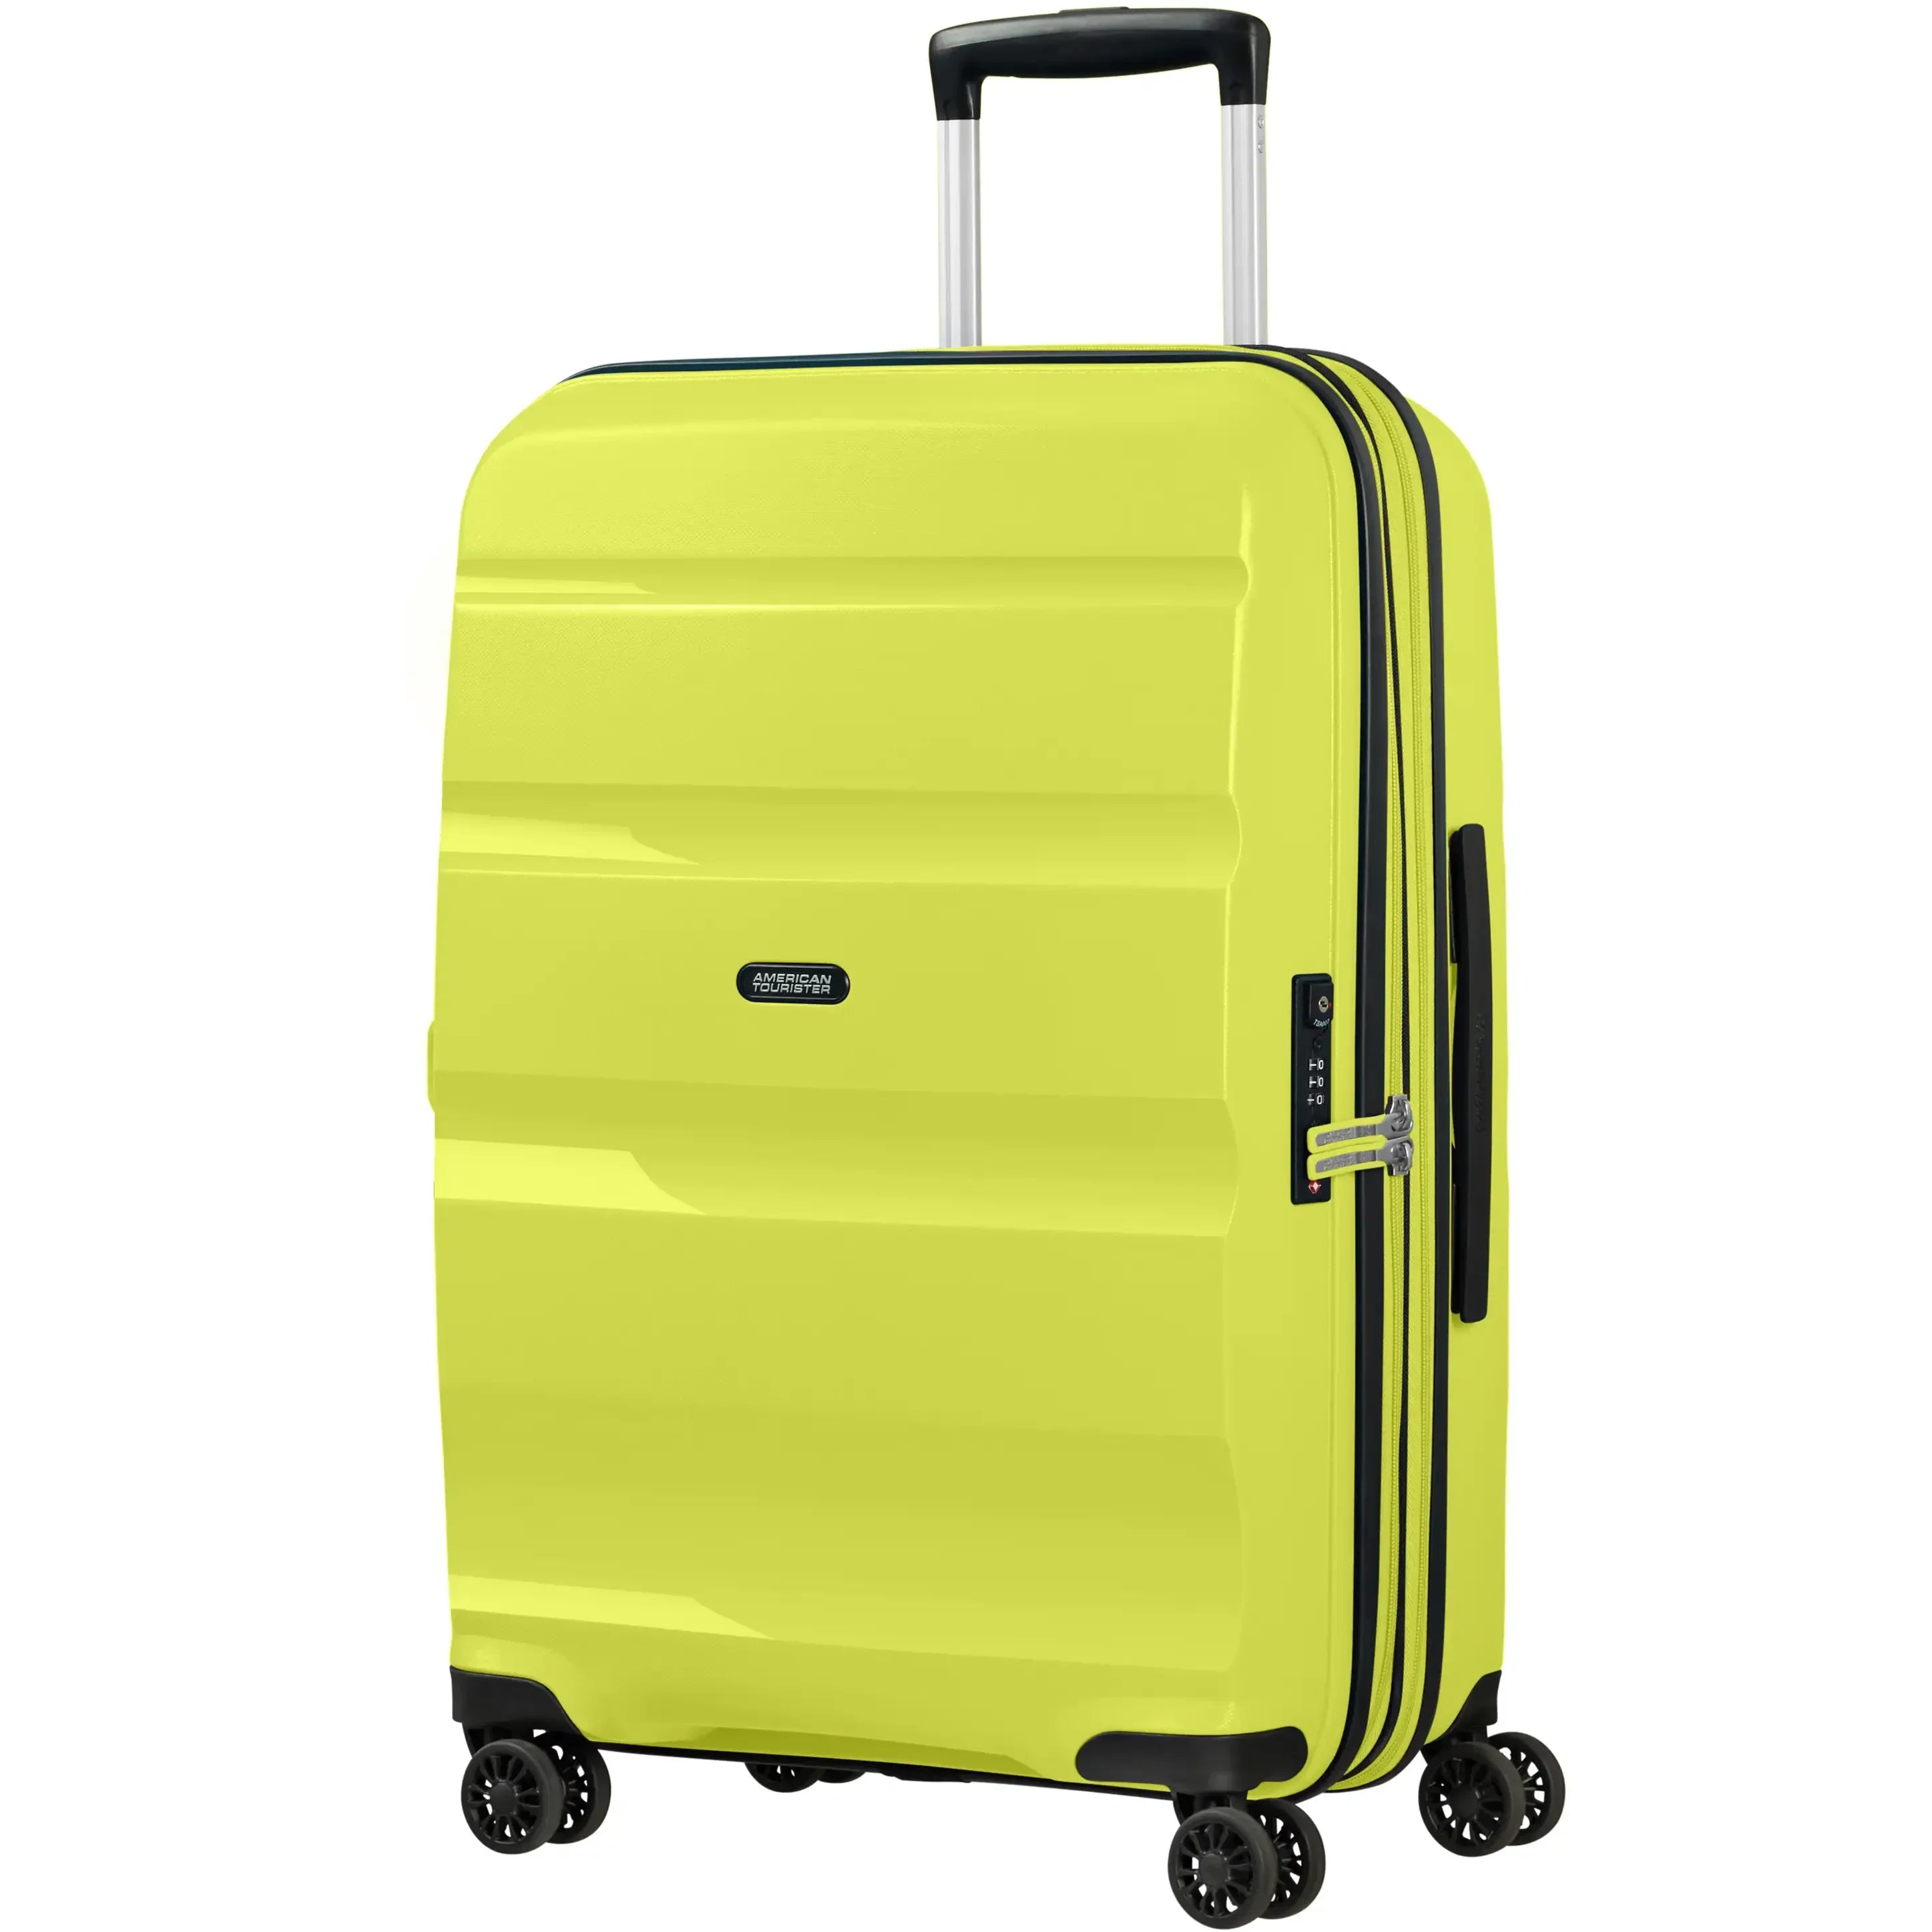 American Tourister Bon Air DLX Spinner 4-Rollen Trolley 66 cm - magma red